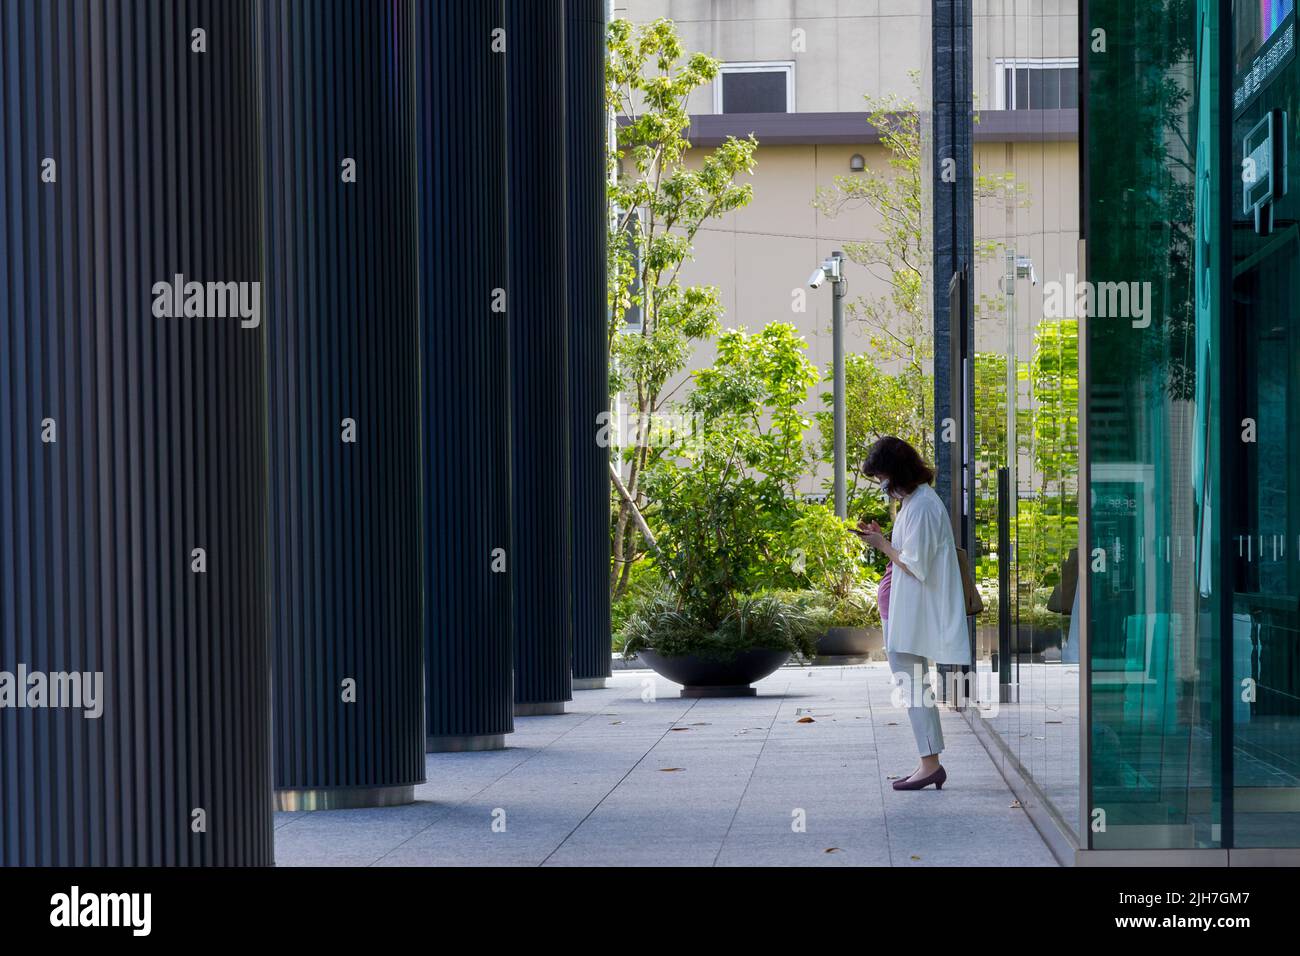 A Japanese woman uses a smartphone outside and modern office tower with pillars. Shibuya, Tokyo, Japan. Stock Photo